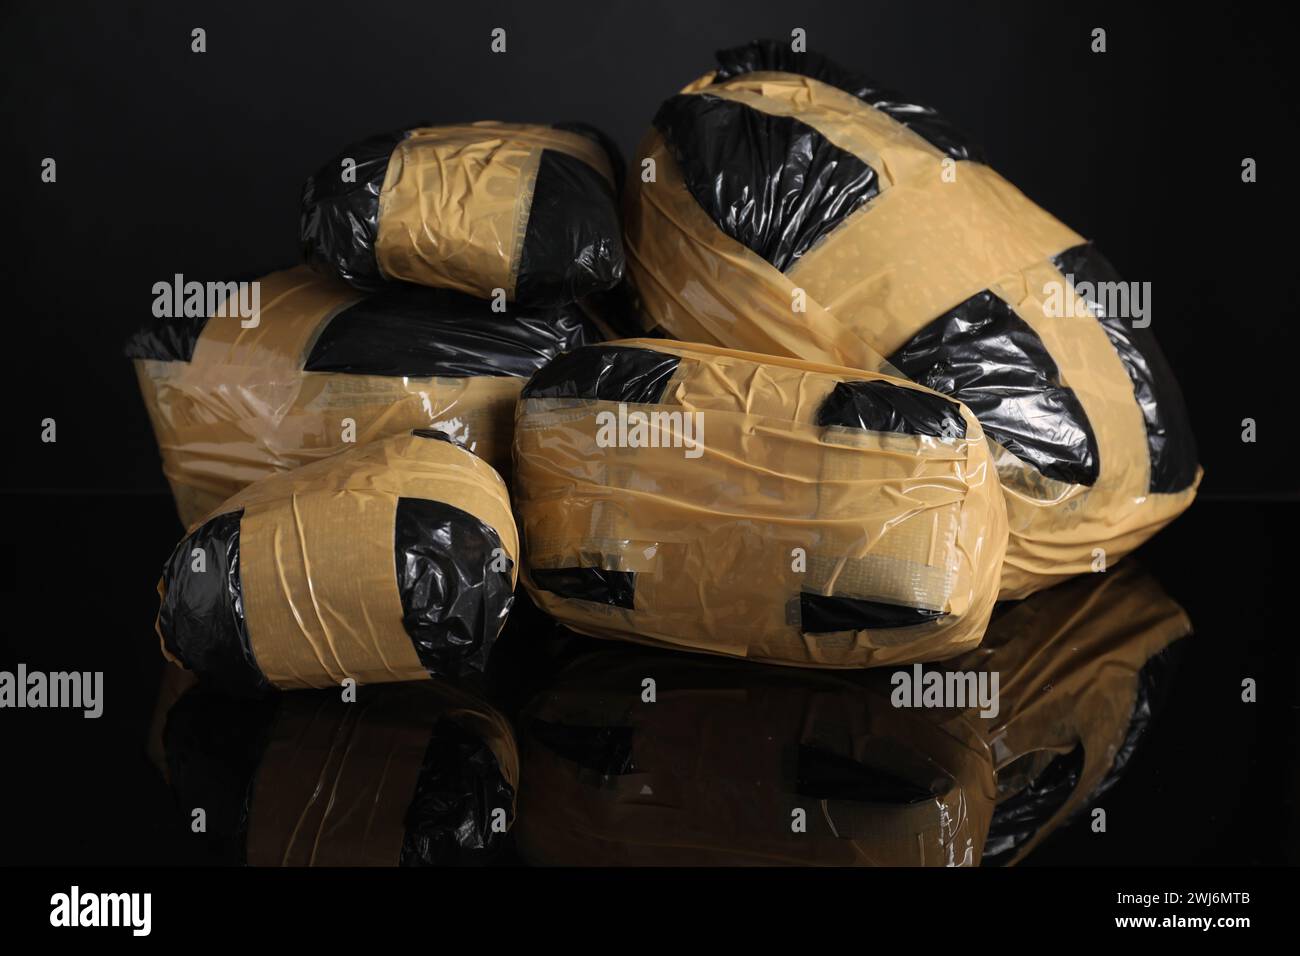 Smuggling and drug trafficking. Packages with narcotics on black mirror surface Stock Photo